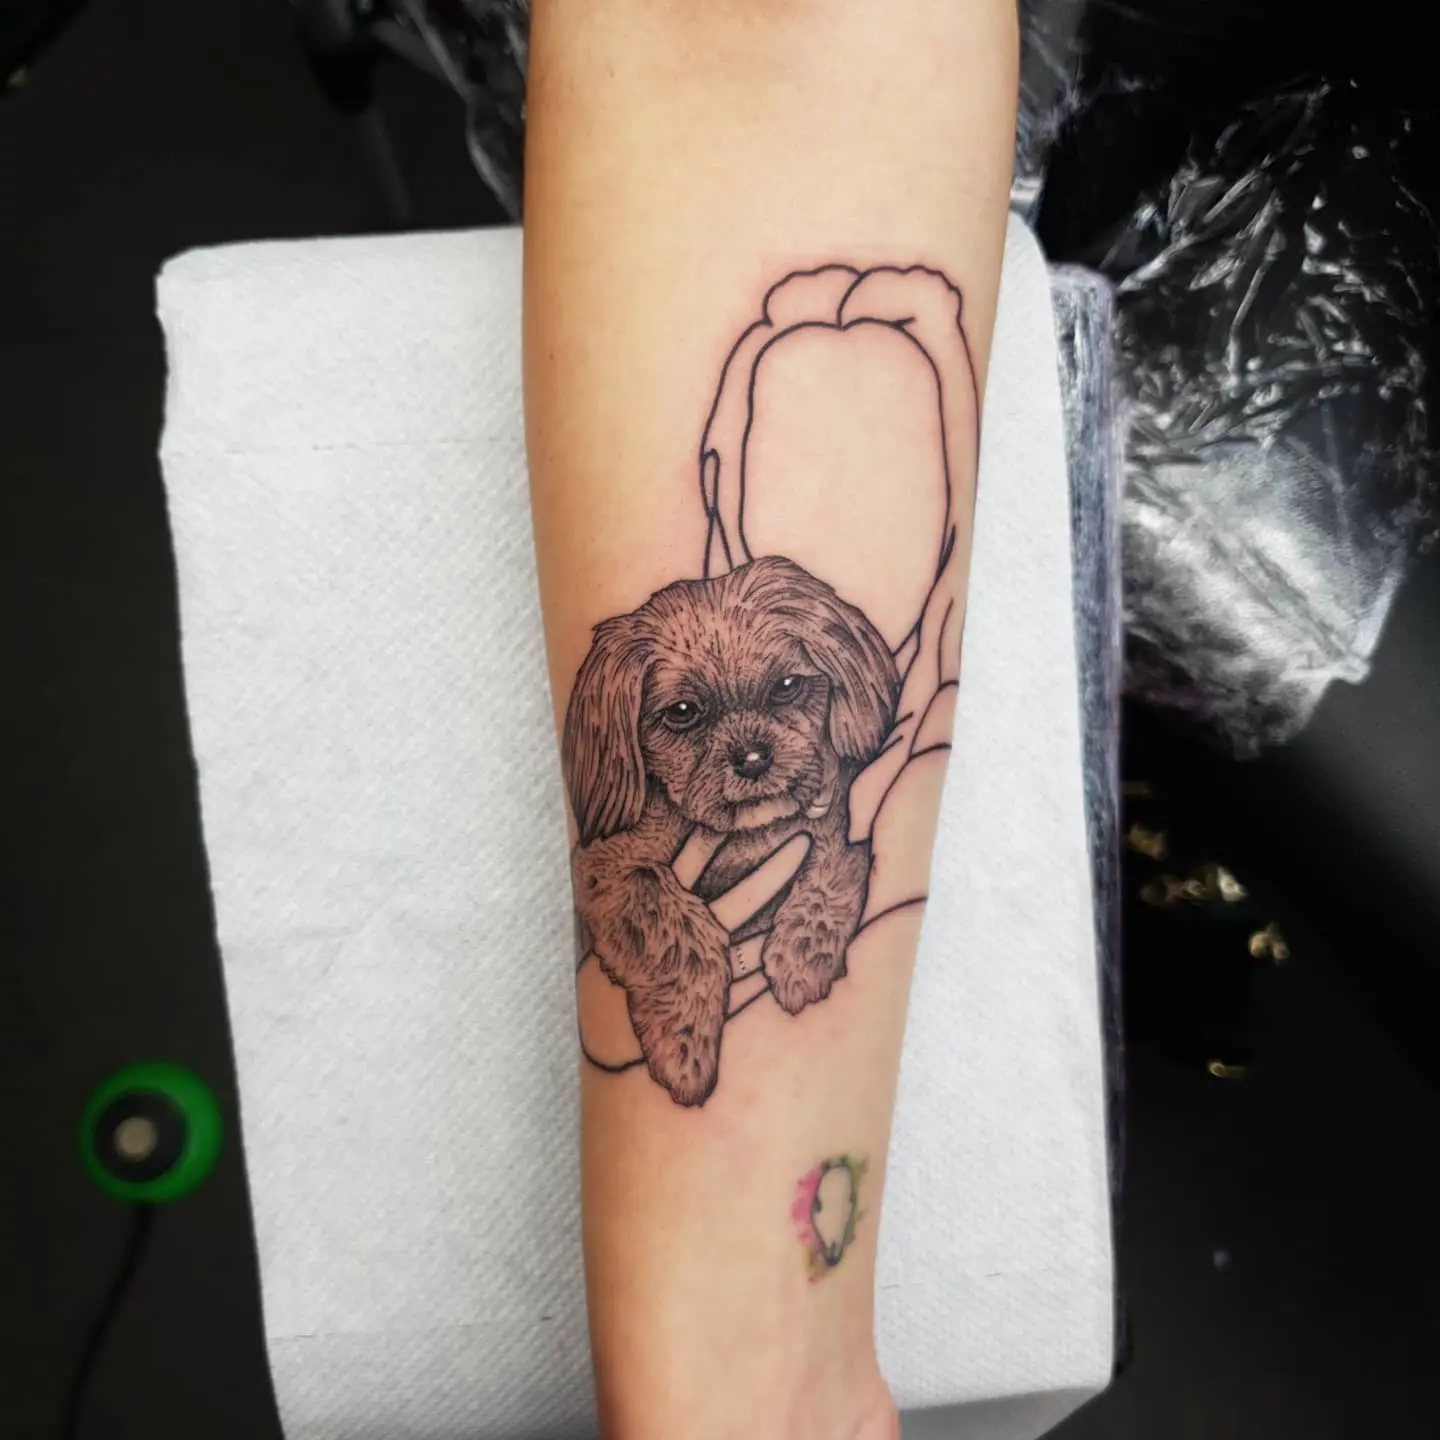 Cool client idea- had a blast today with this tattoo of "Lexi" and her owner - thank you Johanna! Interesting working with different contrast and styles! Done @studioxiiigallery portraittattoo dogportrait dogtattoo linearportrait lineartattoo blackandgreytattoo realismtattoo tattoos edinburghtattooer edinburgh scottishtattooer scotland tattoosbyalanross alrosstattoo studioxiiigallery studioxiii